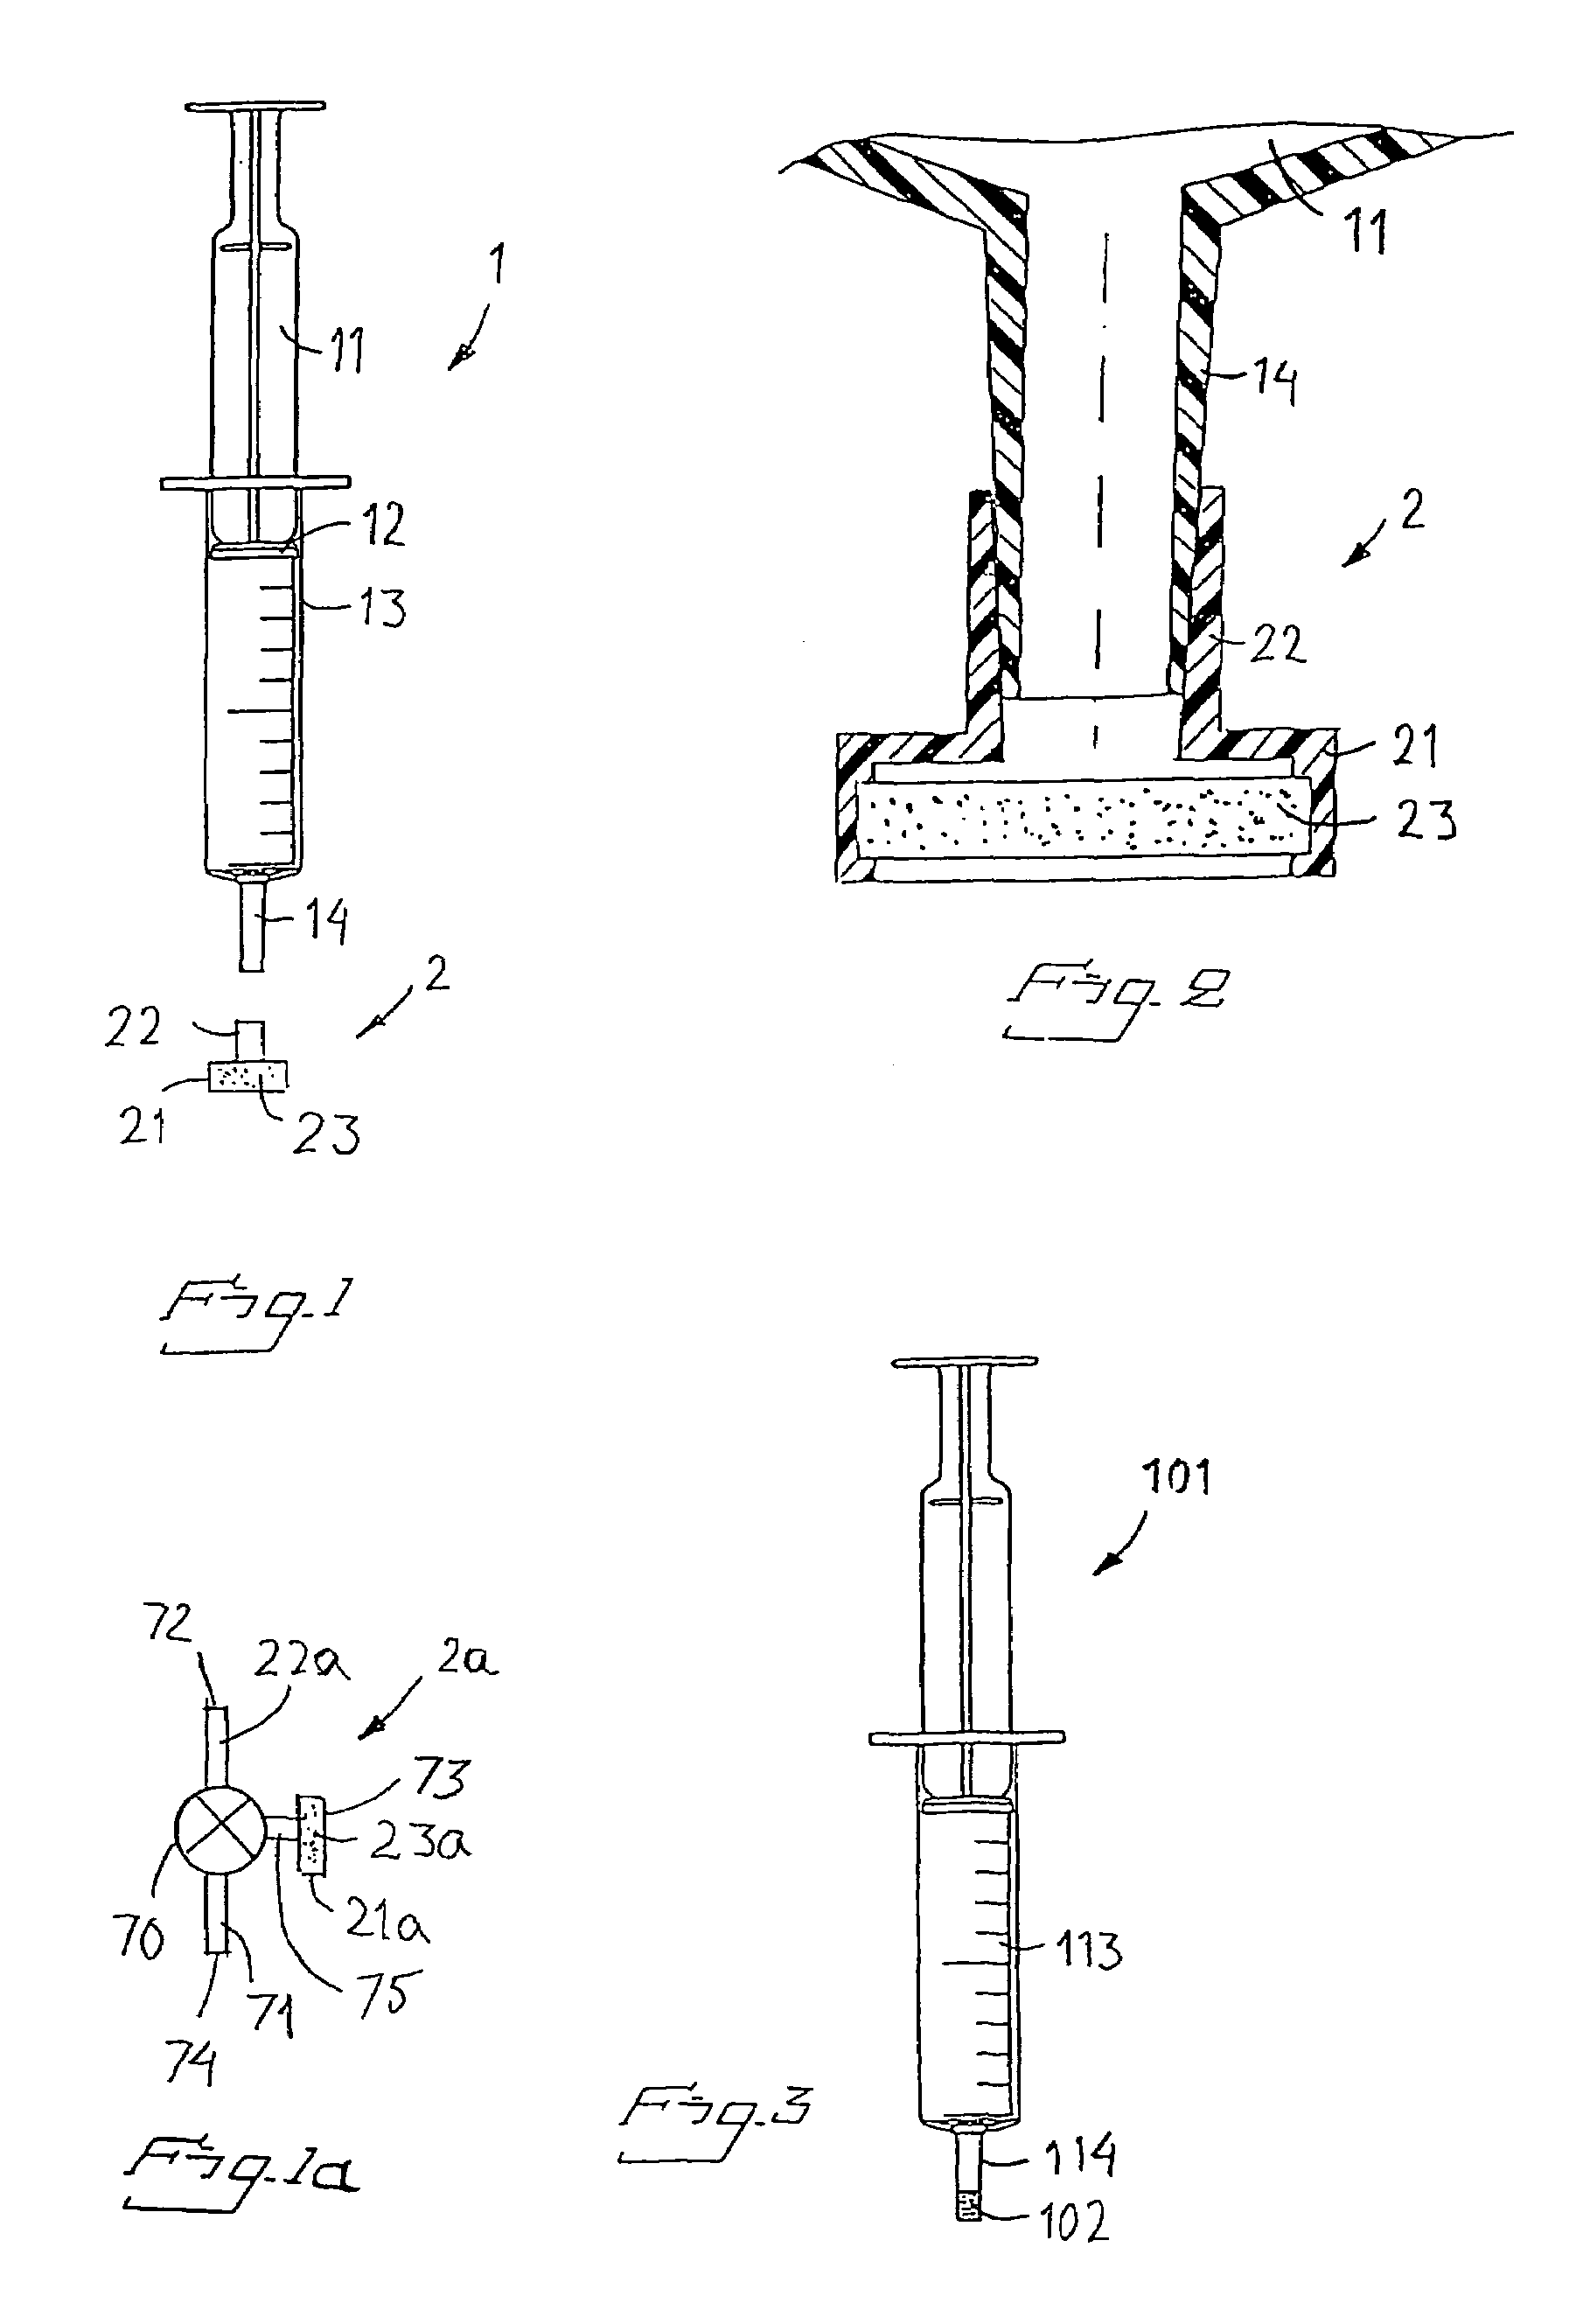 Method and arrangements in aseptic preparation